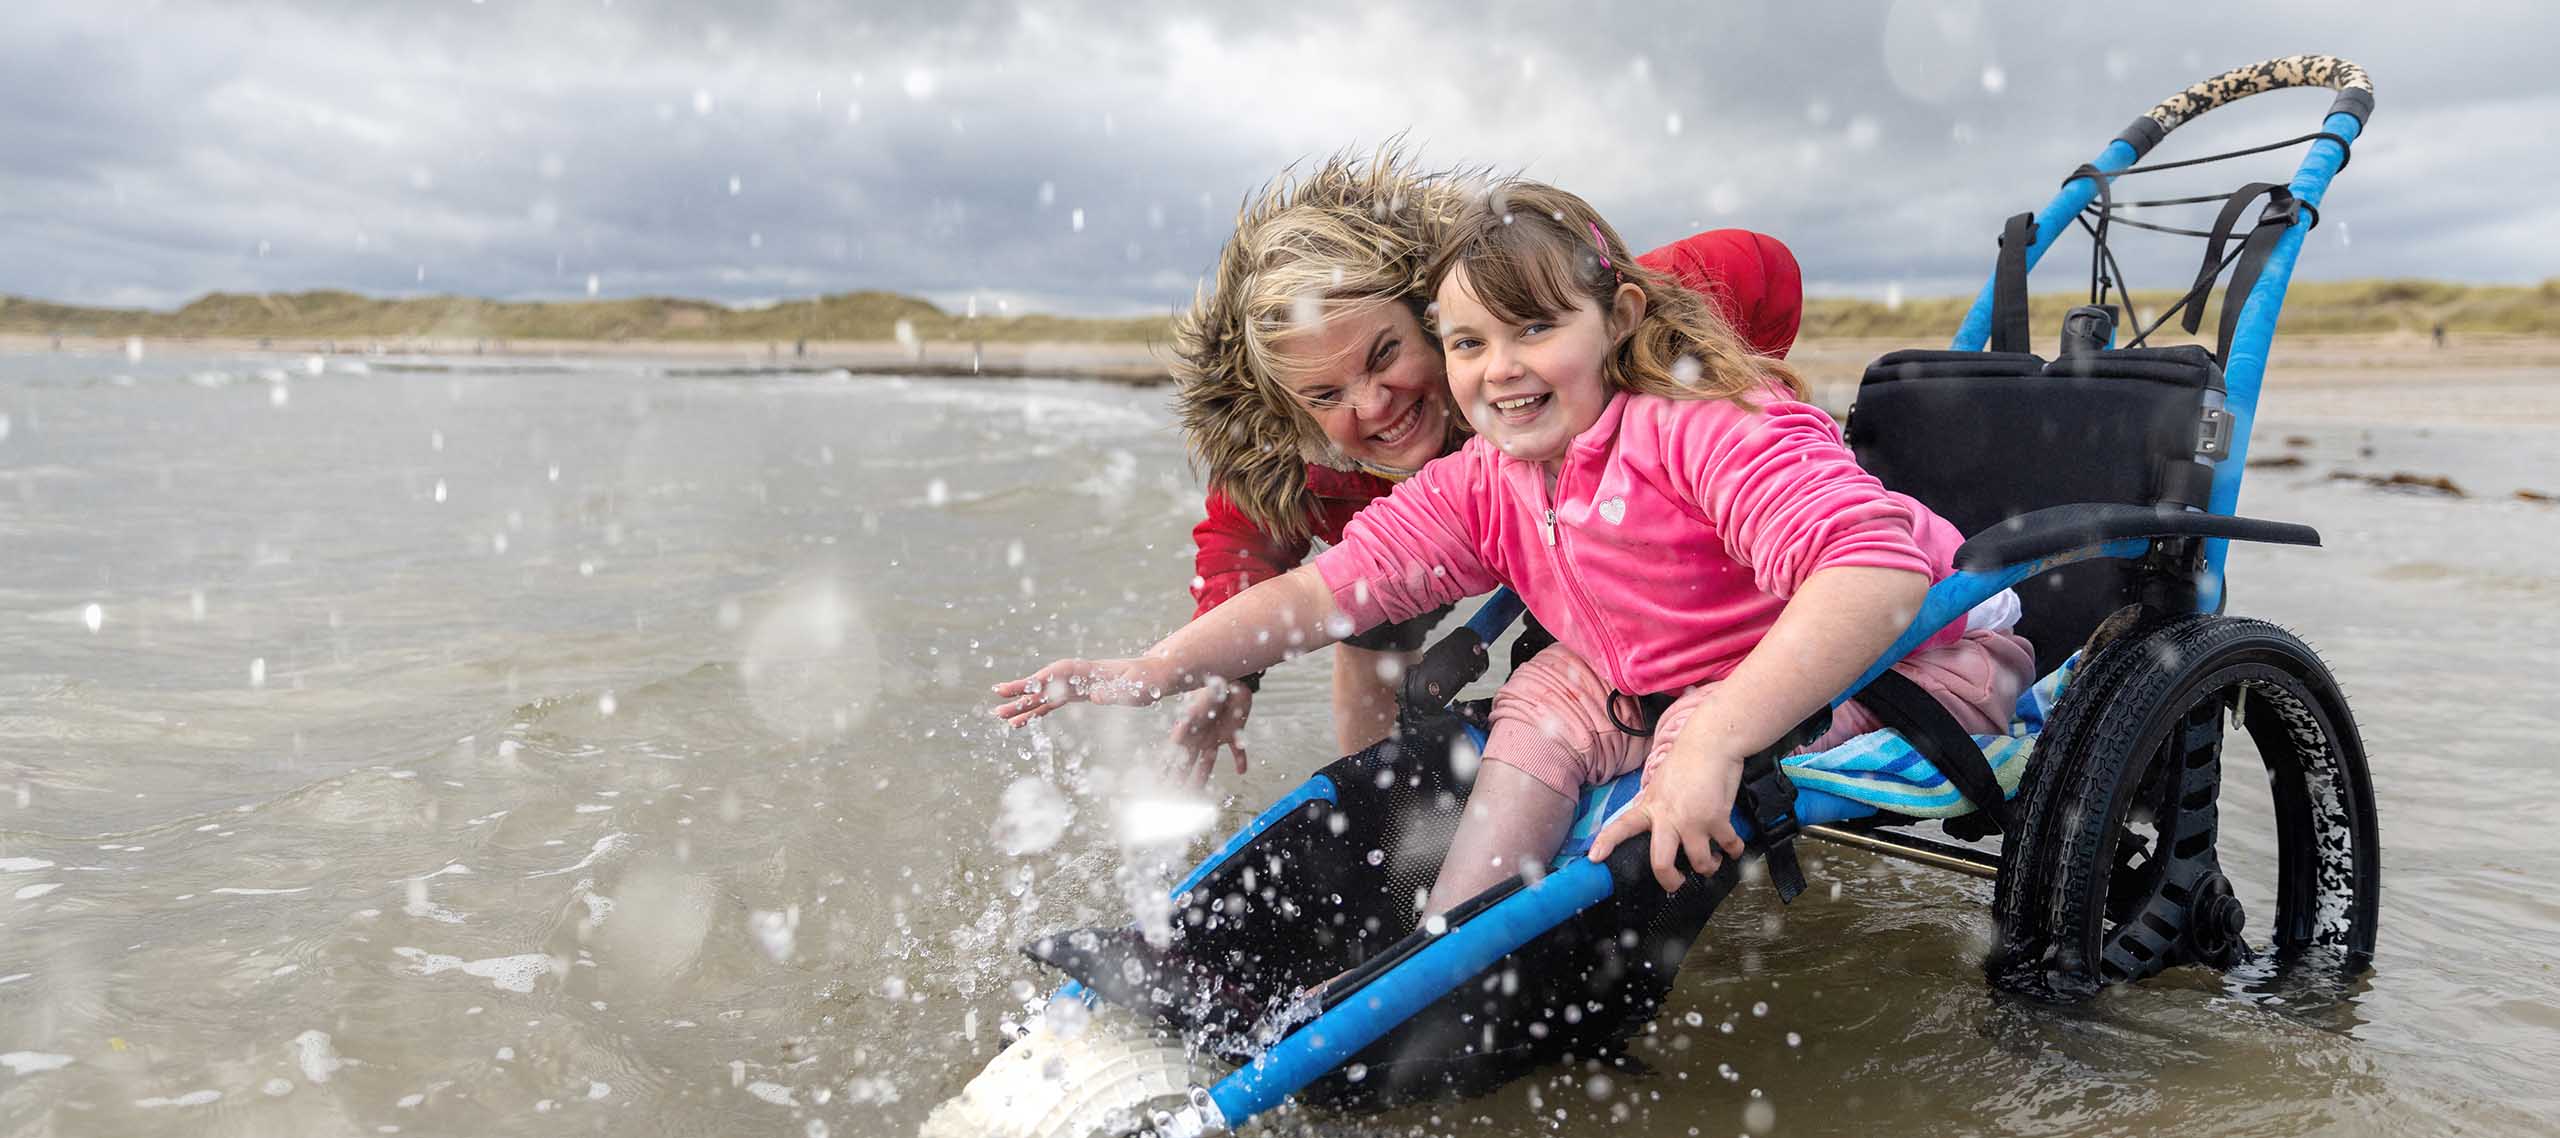 Mother and daughter in the sea in Beadnell, England, splashing around and smiling. The daughter is a wheelchair user.